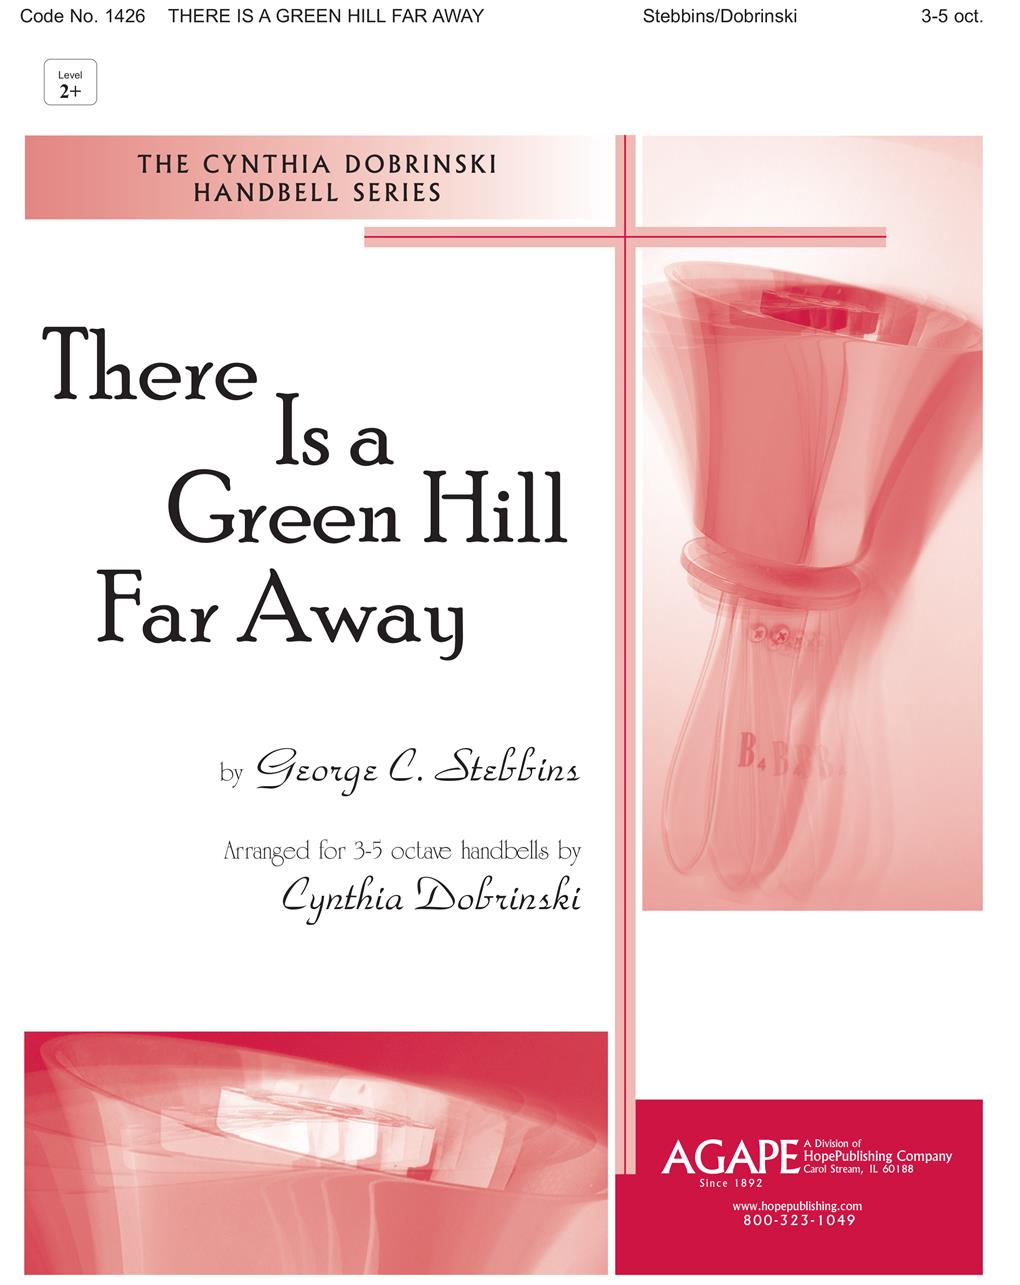 There Is a Green Hill Far Away -3-5 oct. Cover Image